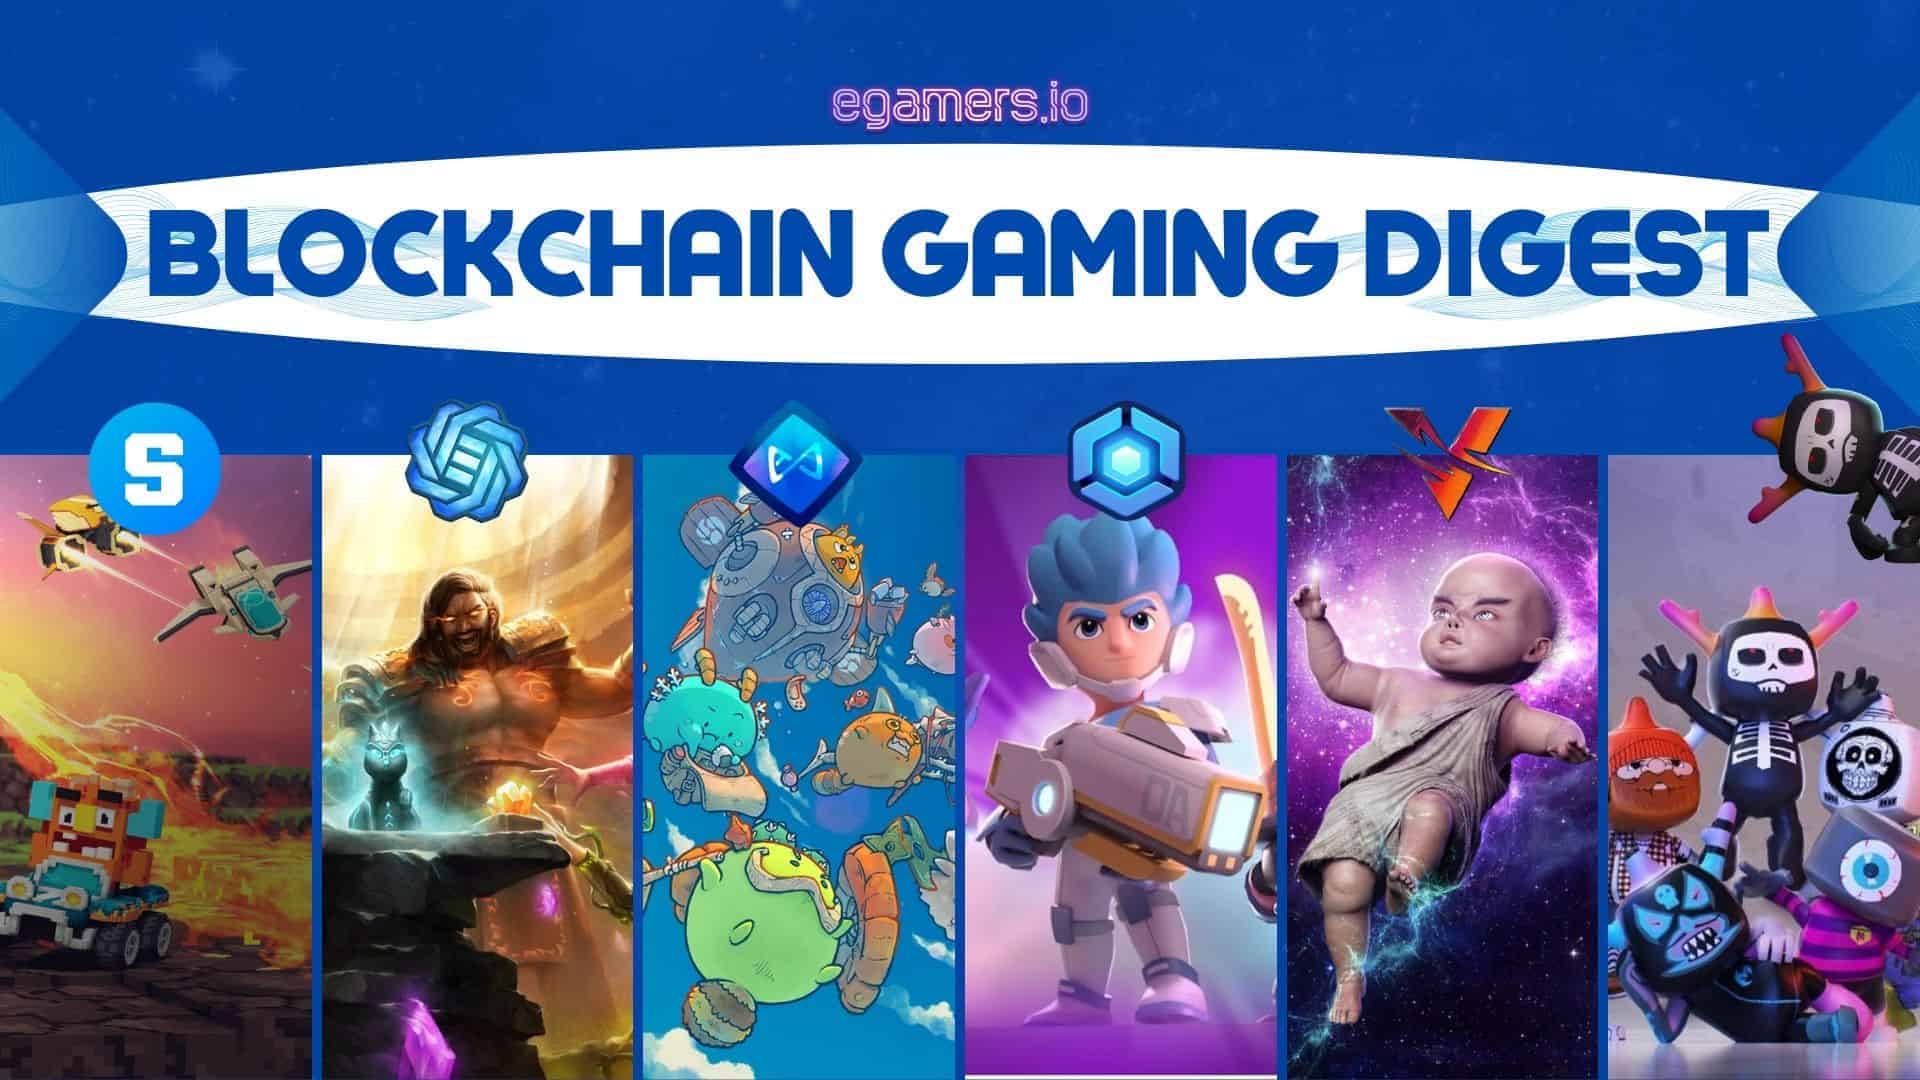 BLOCKCHAIN GAMING DIGEST new Enjin's newest addition is not a game, but Caleb Applegate, a successful entrepreneur with more than a decade of experience and a proven track record of achievements across various industries, including gaming.